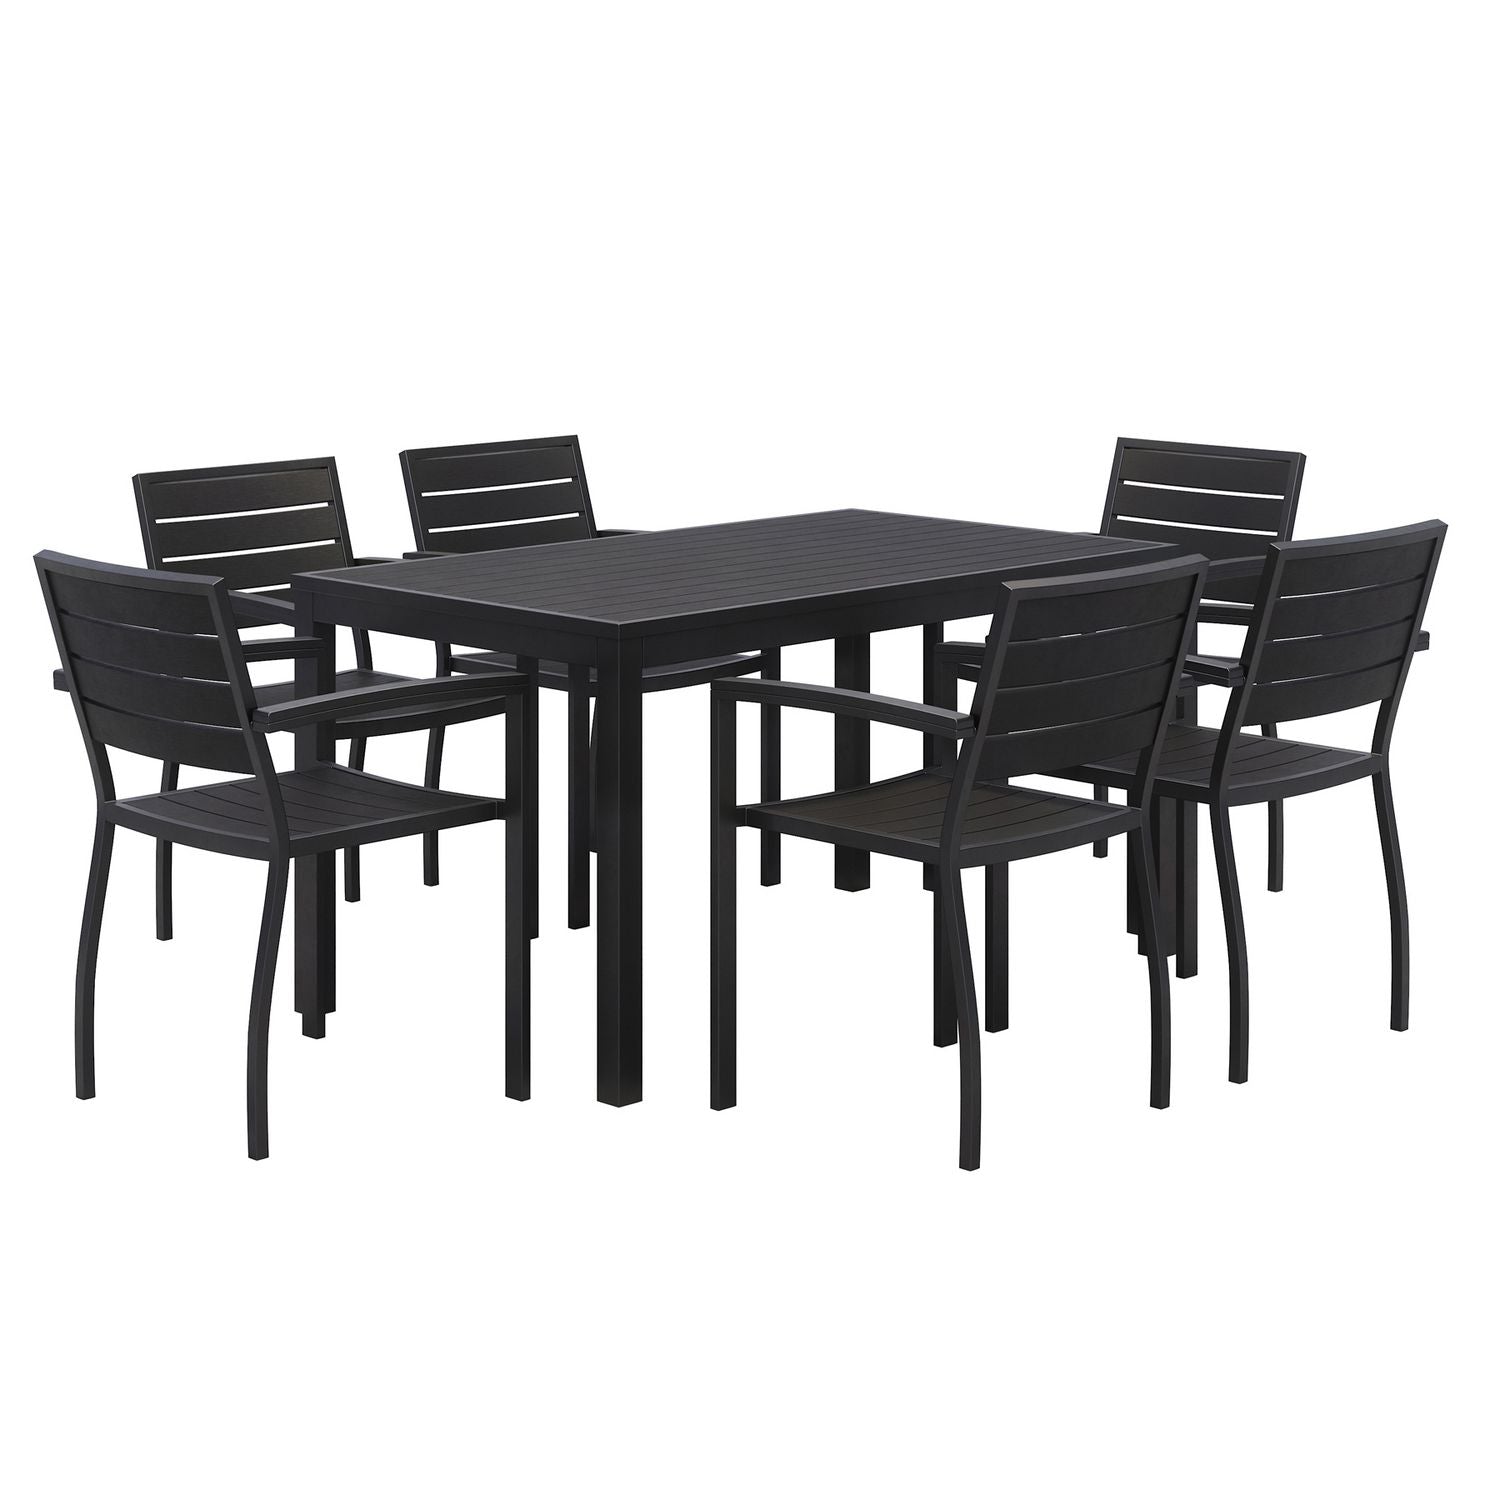 eveleen-outdoor-patio-table-with-six-black-powder-coated-polymer-chairs-32-x-55-x-29-black-ships-in-4-6-business-days_kfi840031925244 - 1